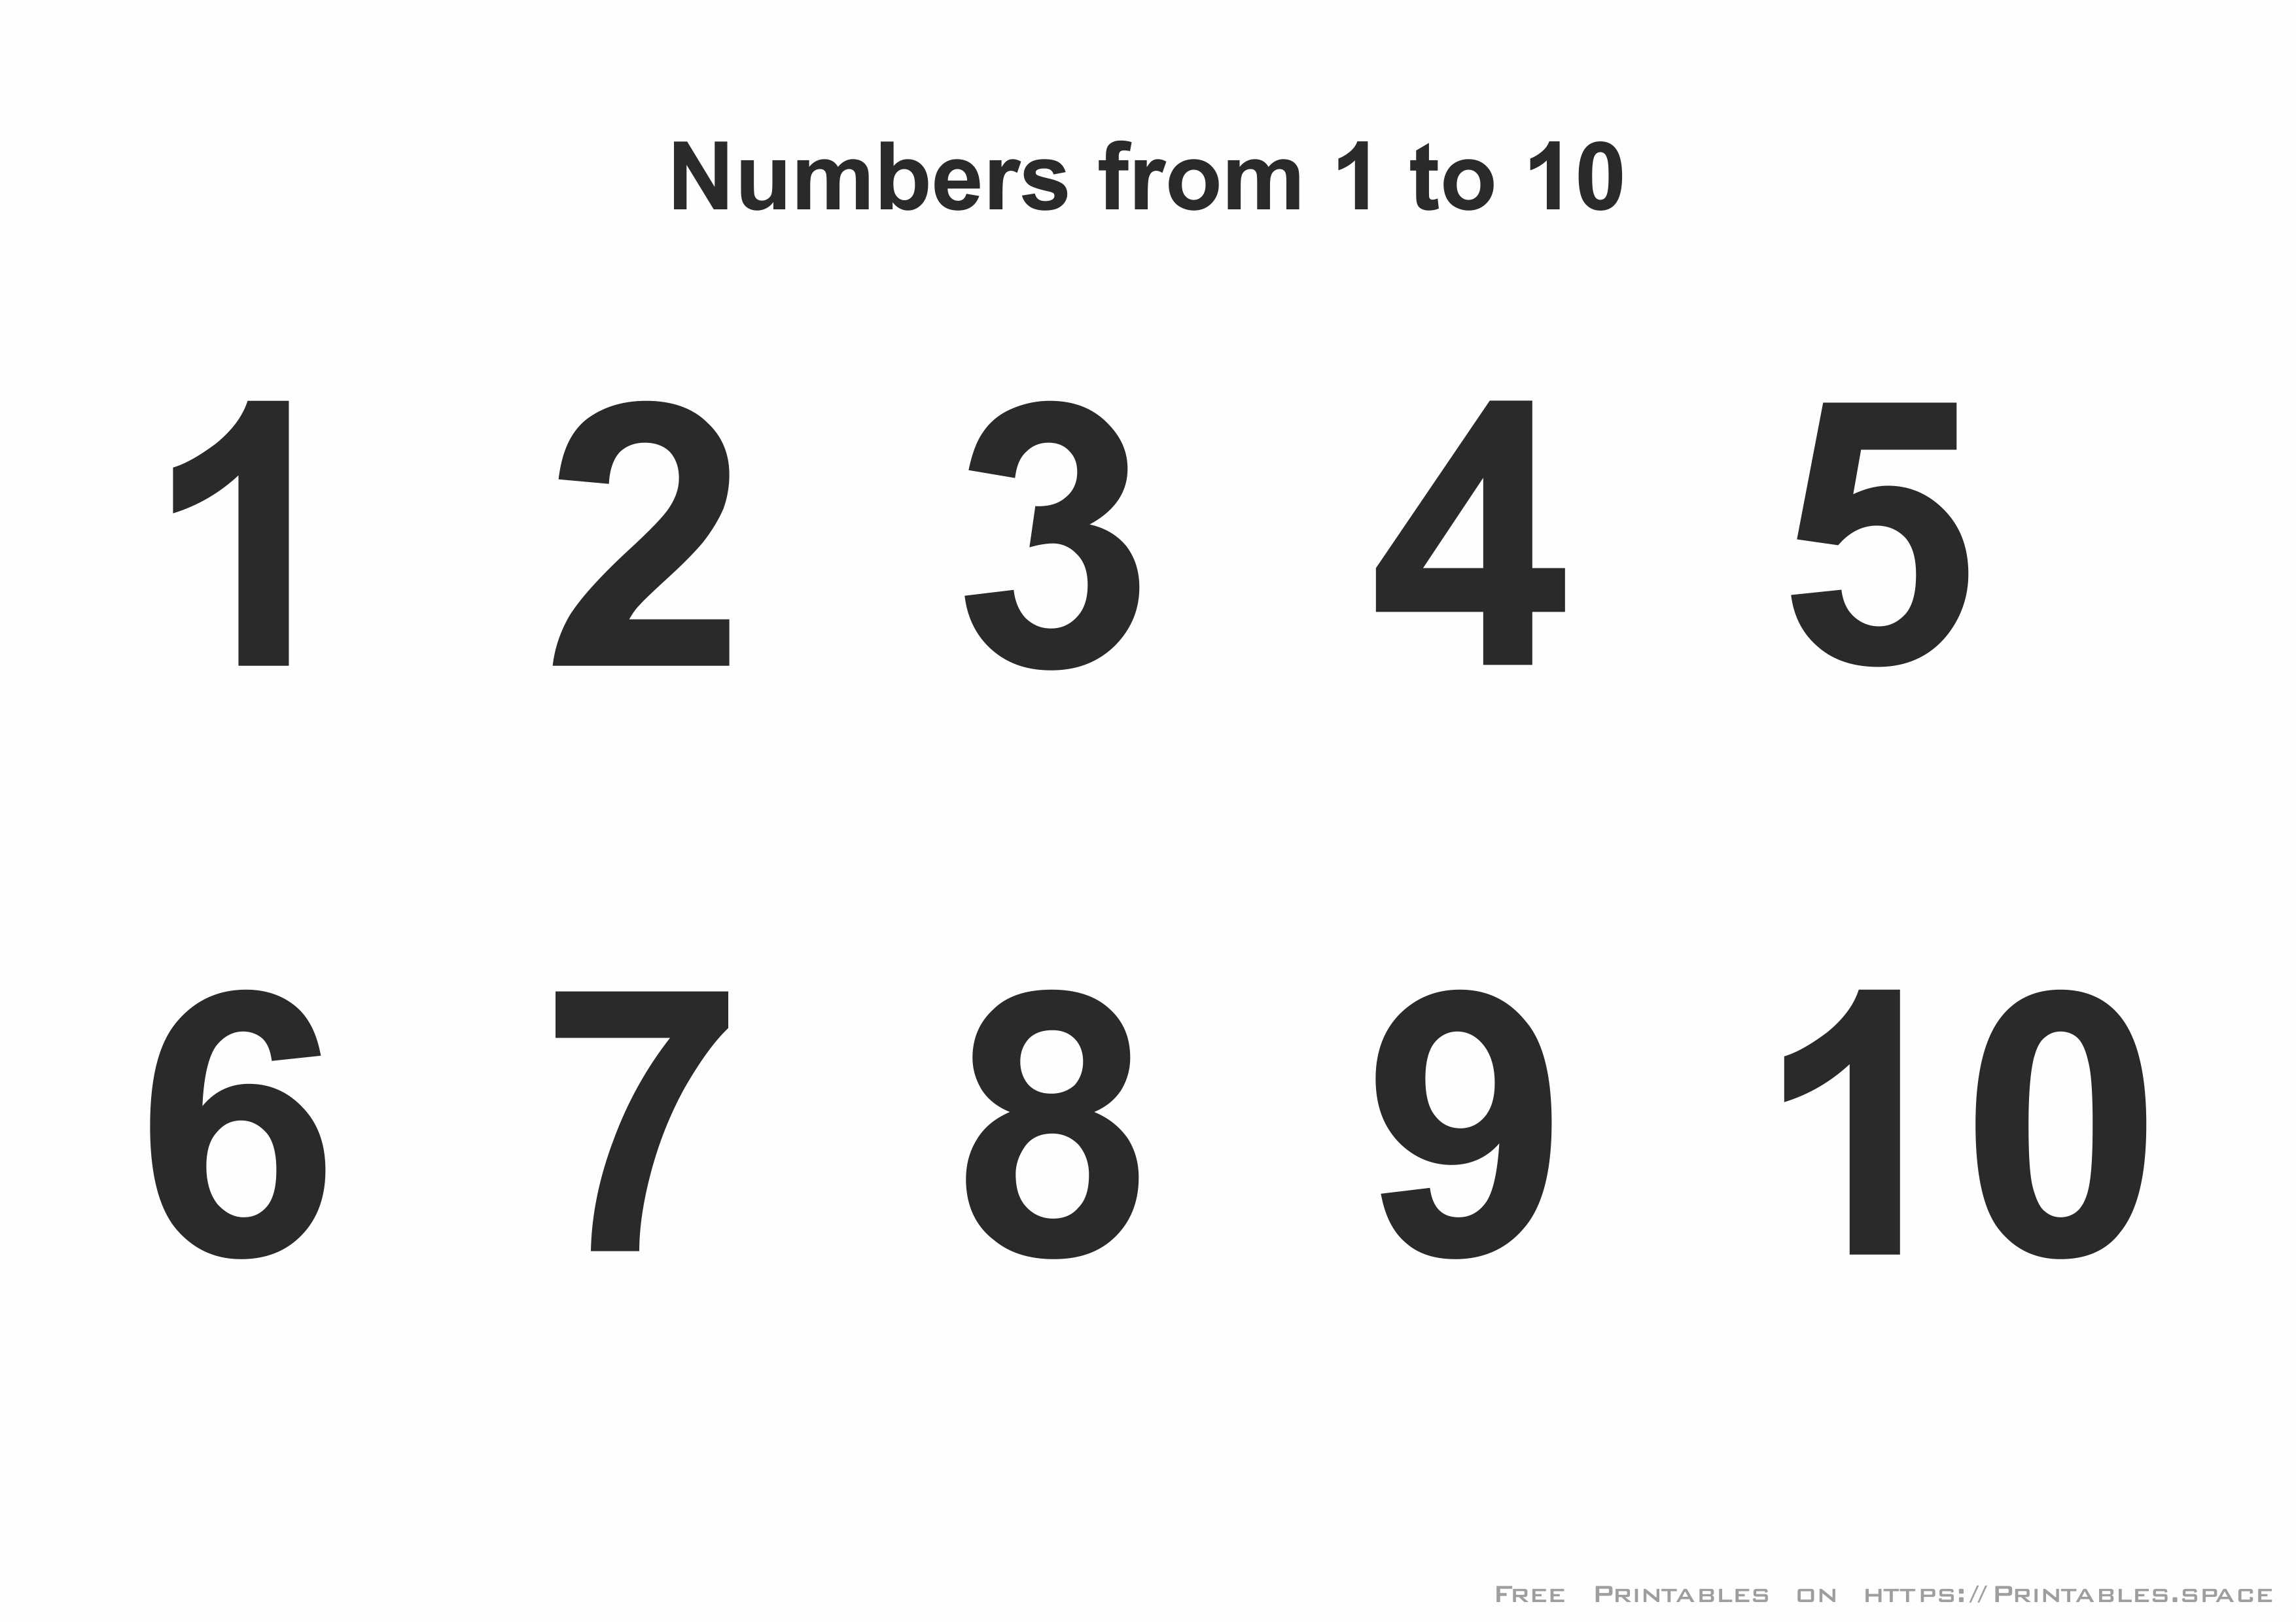 Free Printable Numbers 1-10 - Free Printables - Free Printable Numbers